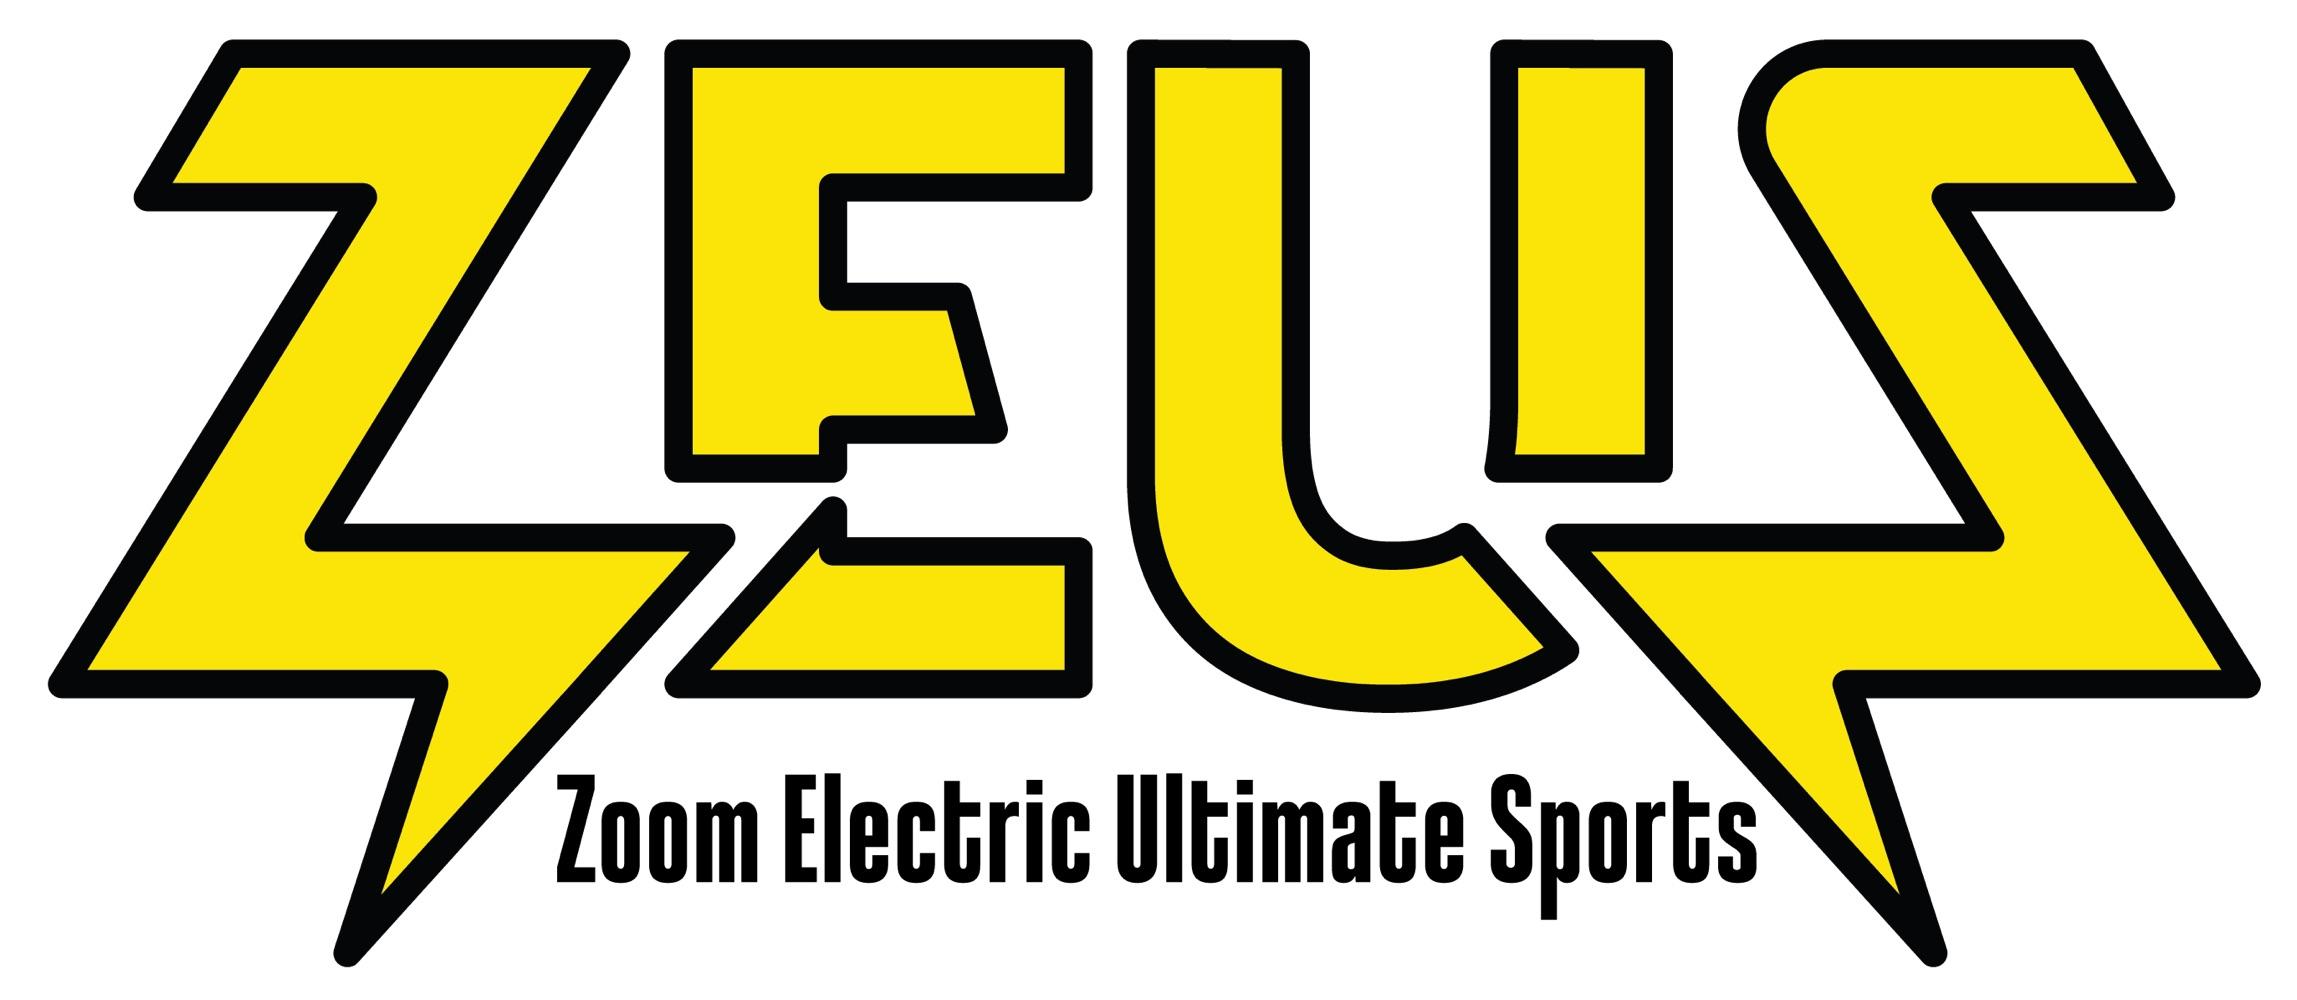 ZEUSZoomElectricUltimateSports